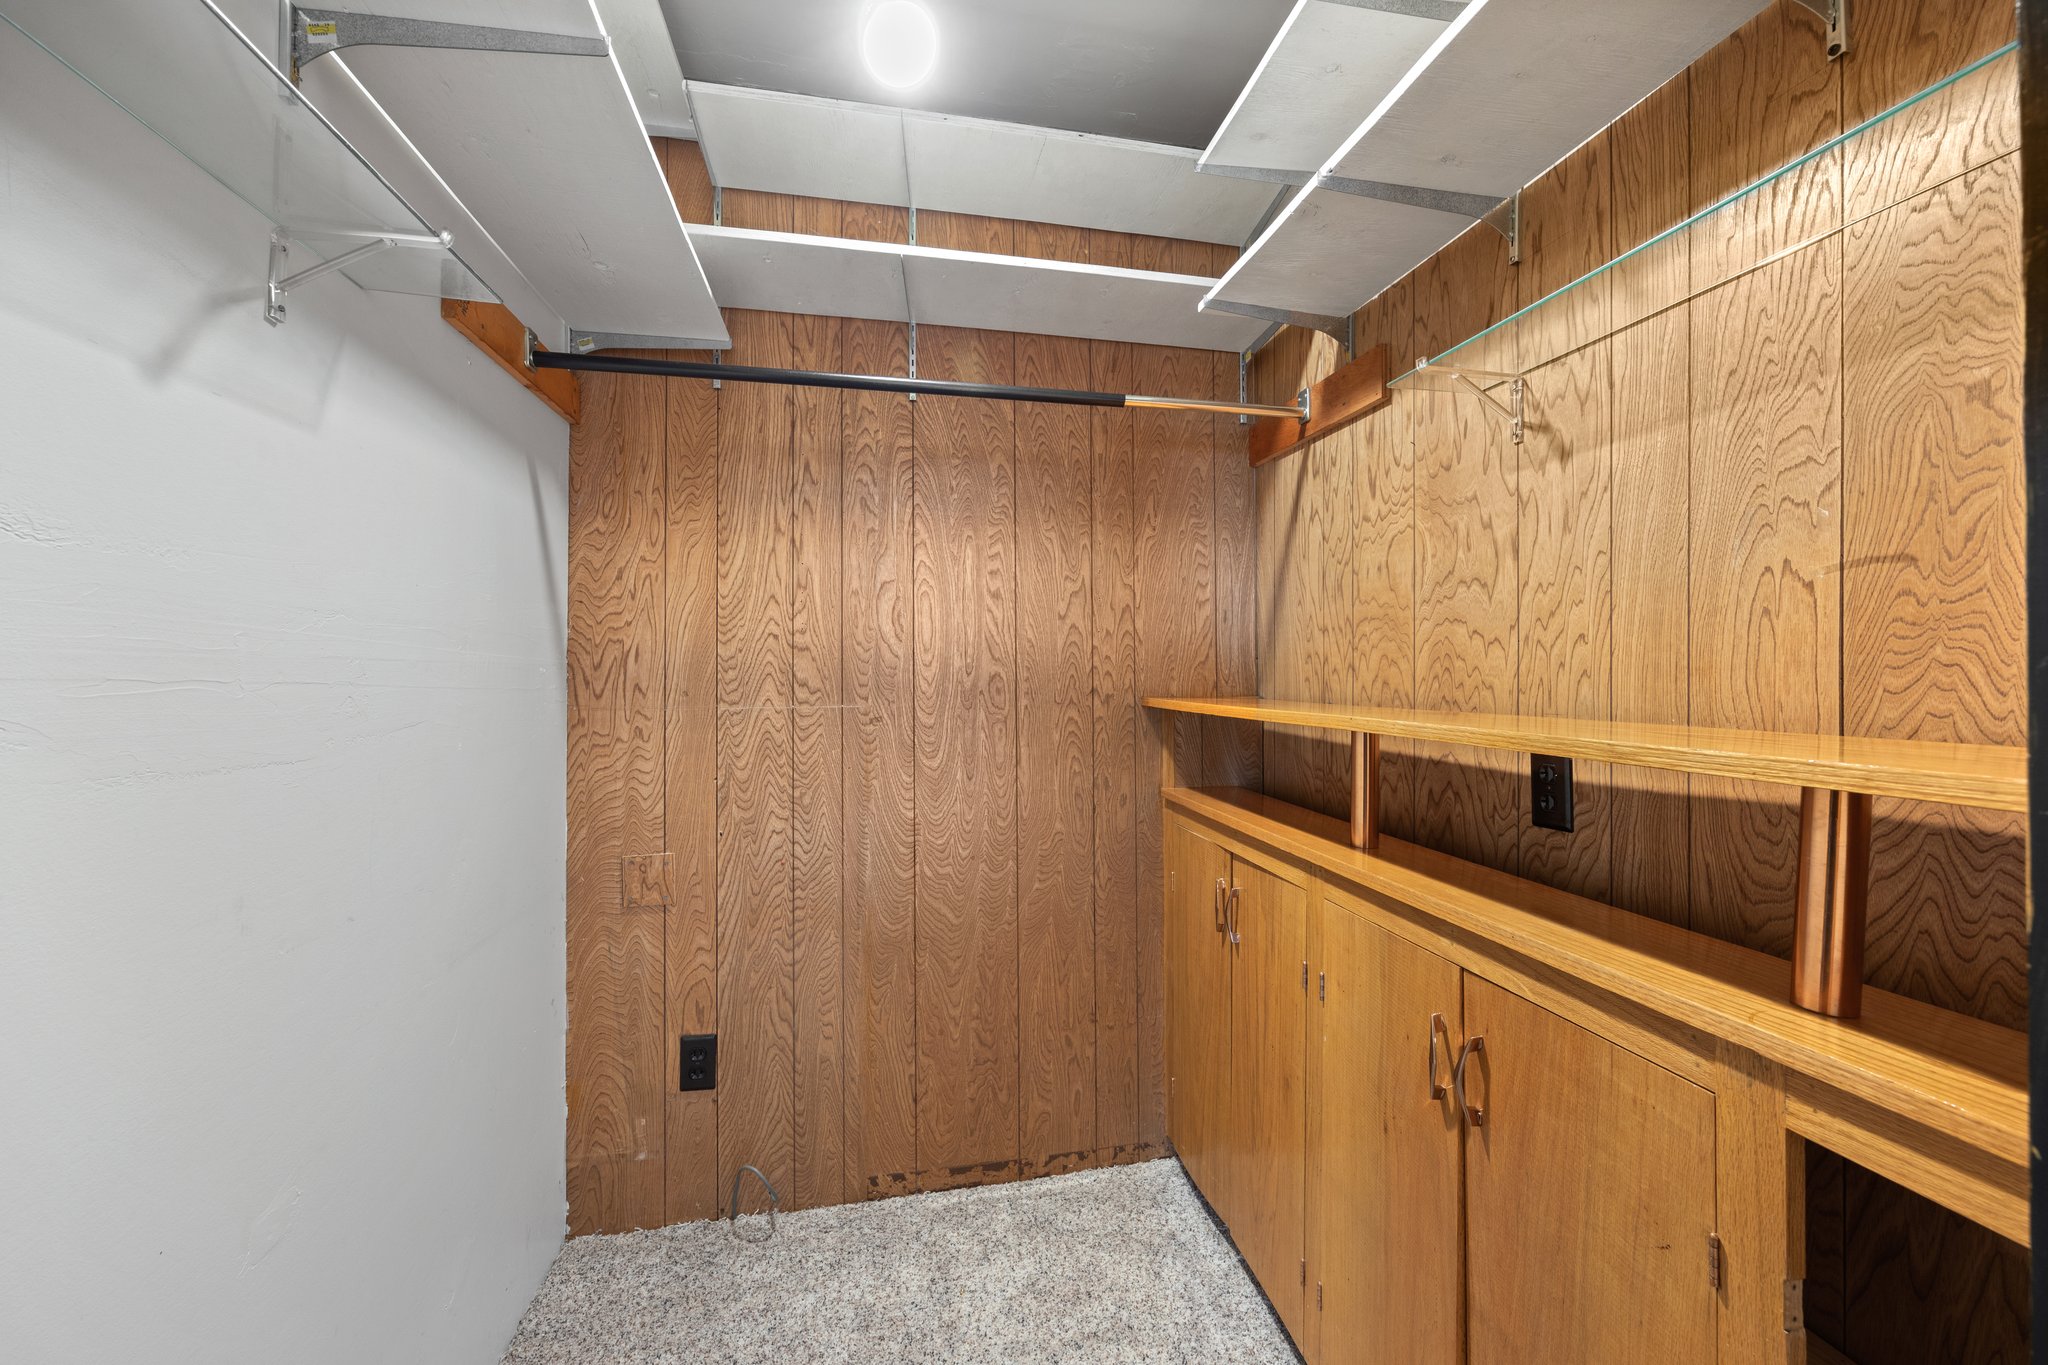 Large Closet~ Was once used by the homeowner as a bar! How cool is that?!